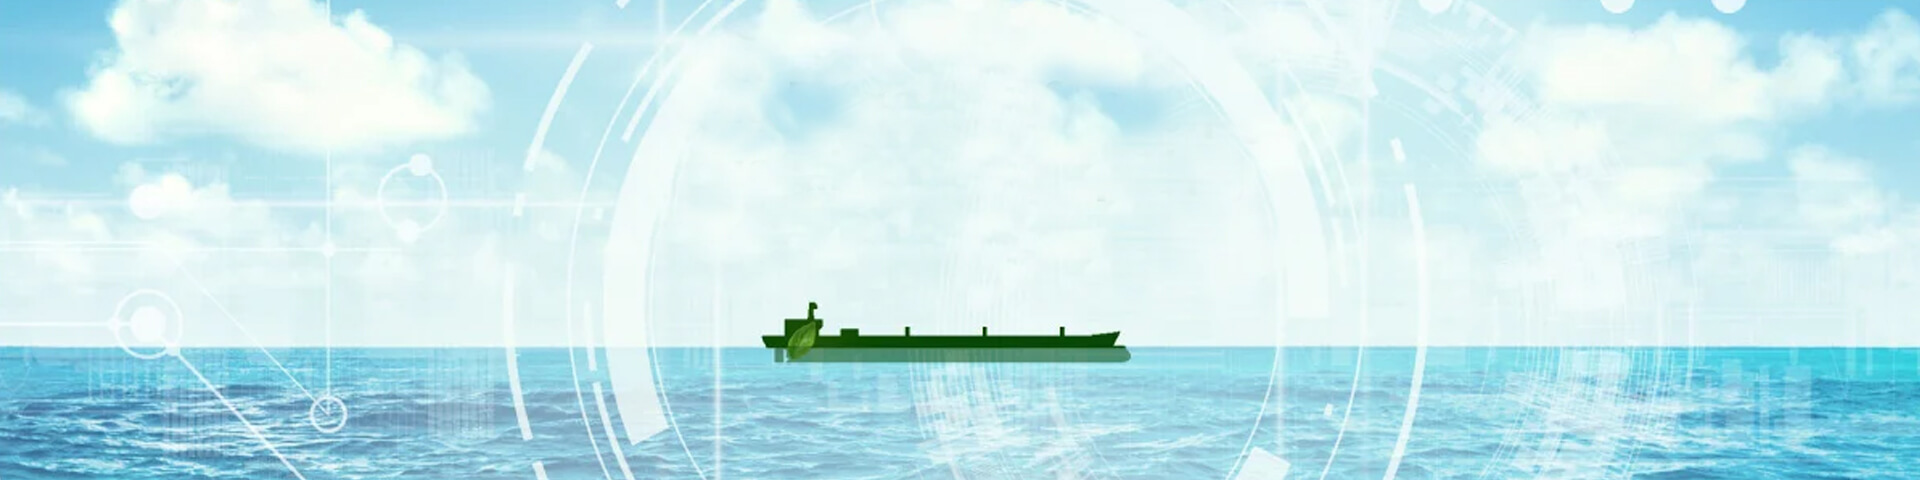 Together for sustainable shipping - 1920x480 clean